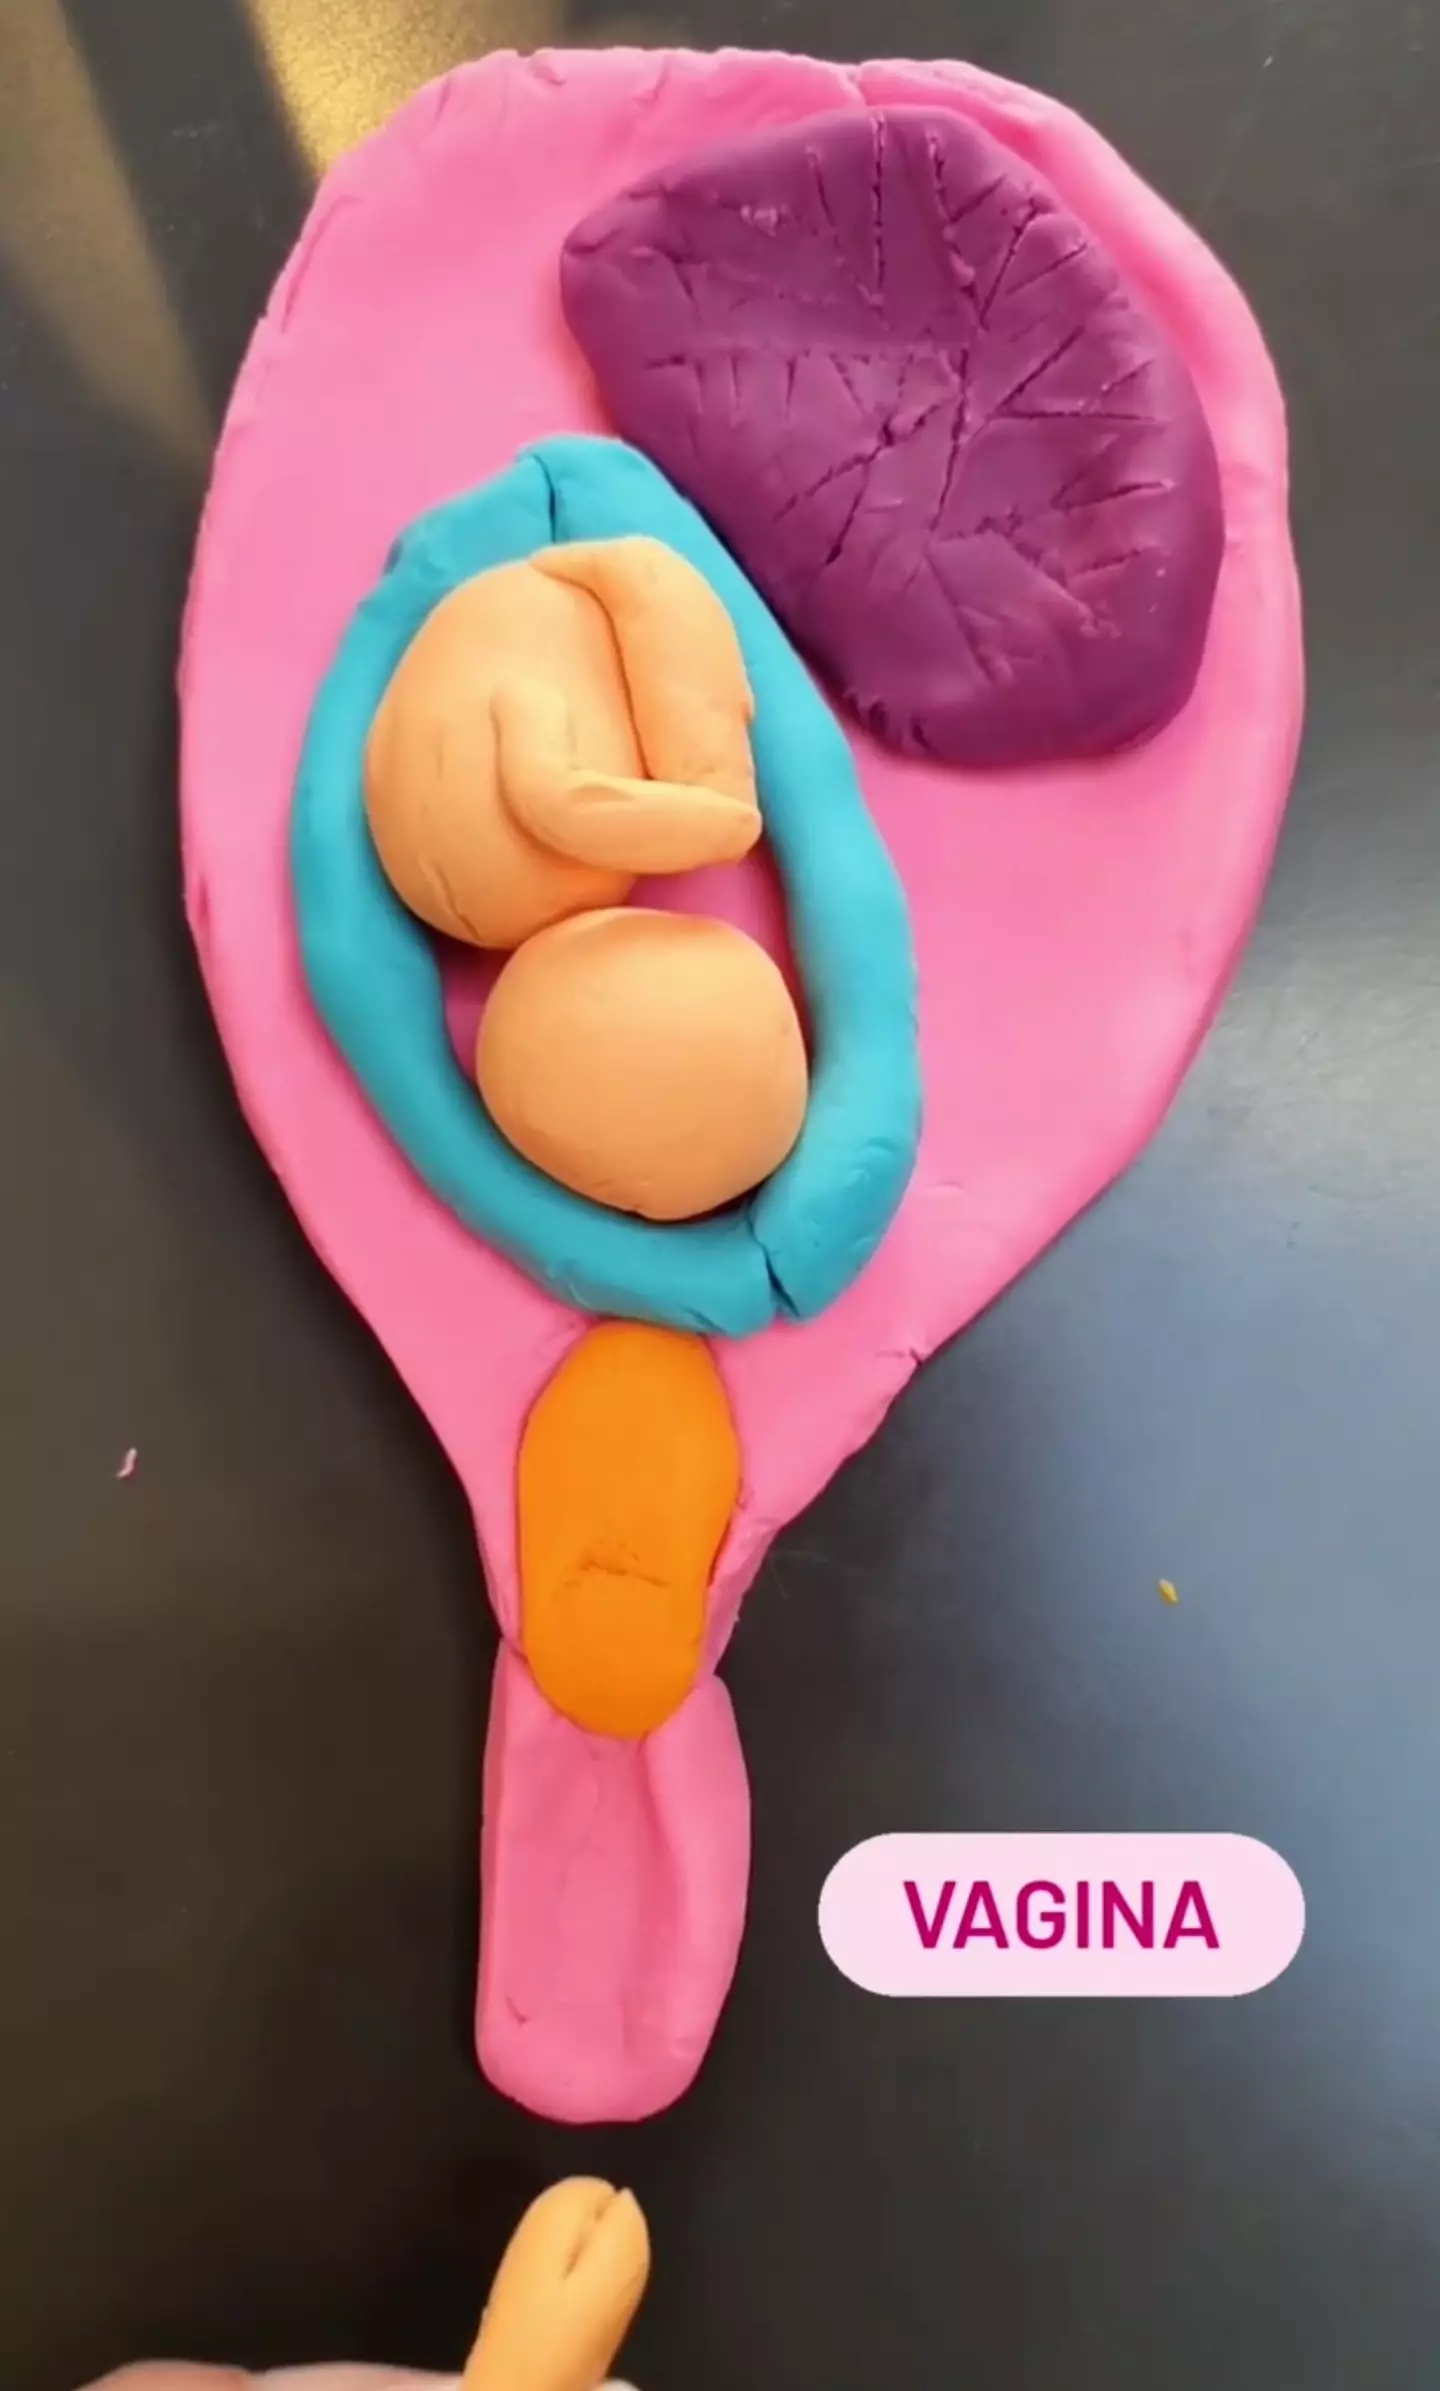 Louise's video complete with Play-Doh anatomy shows why sex can be safe in pregnancy. (